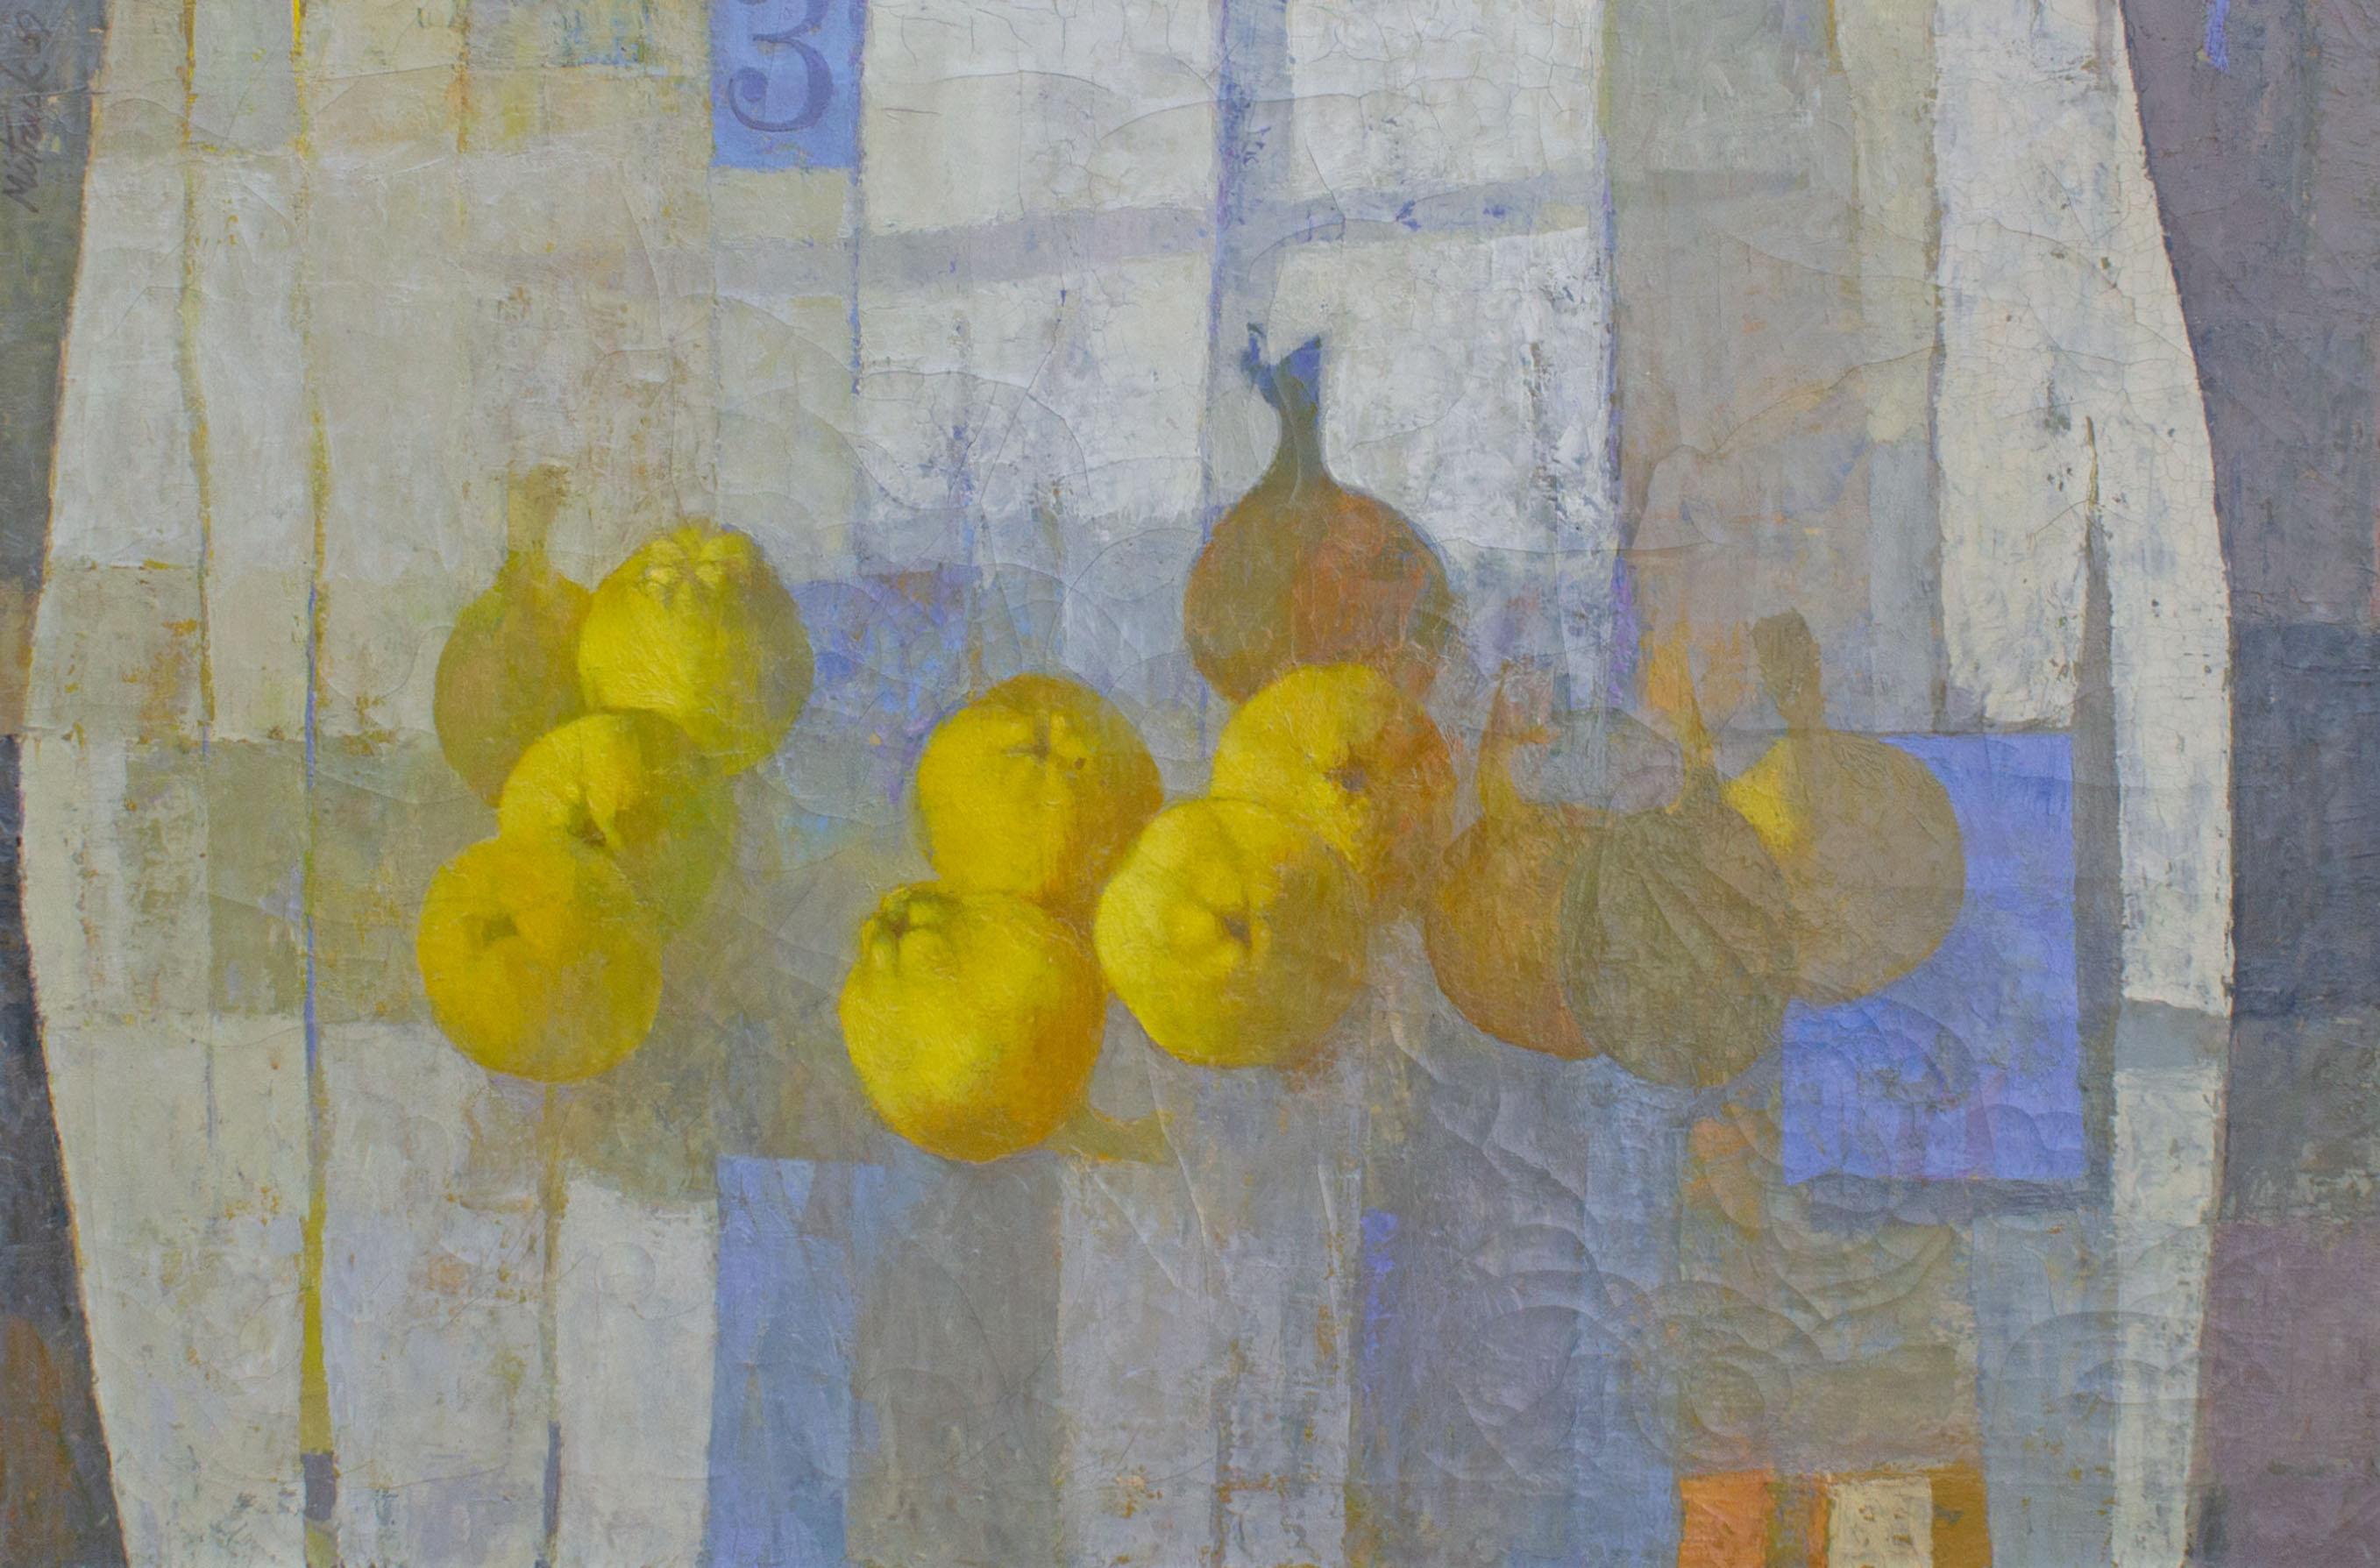 A 1959 oil on canvas painting titled Quince by mid-century Chicago artist Stanley Mitruck (1922-2006). Signed and dated to the top left, this still life painting depicts a grouping of quince in an obscure interior space depicted in blue, gray, and